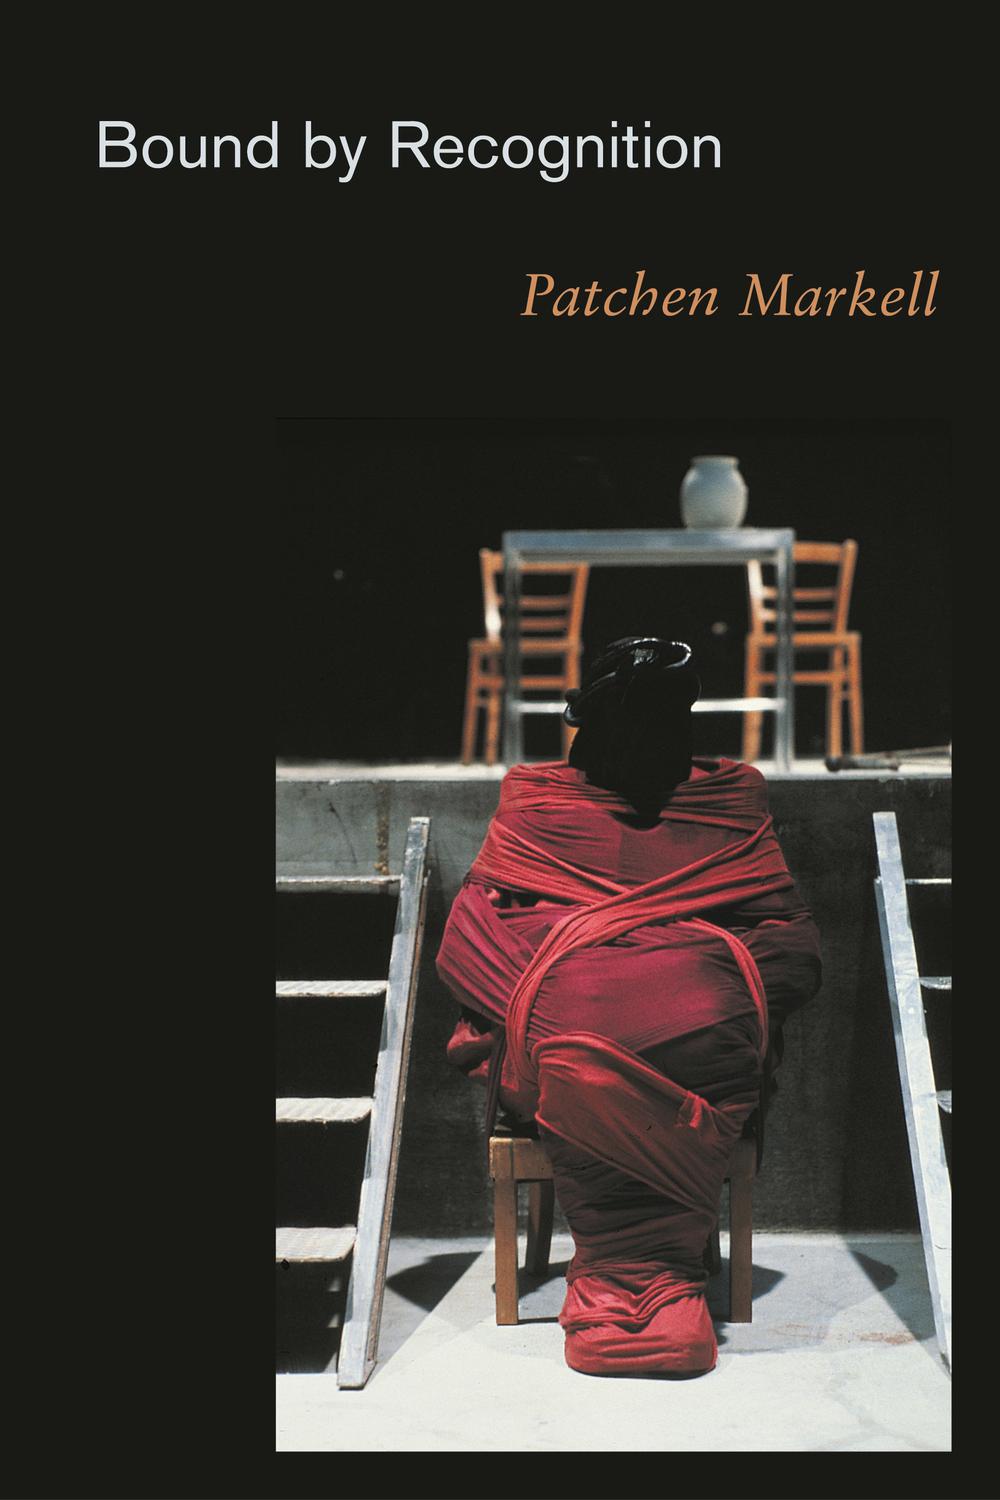 Bound by Recognition - Patchen Markell